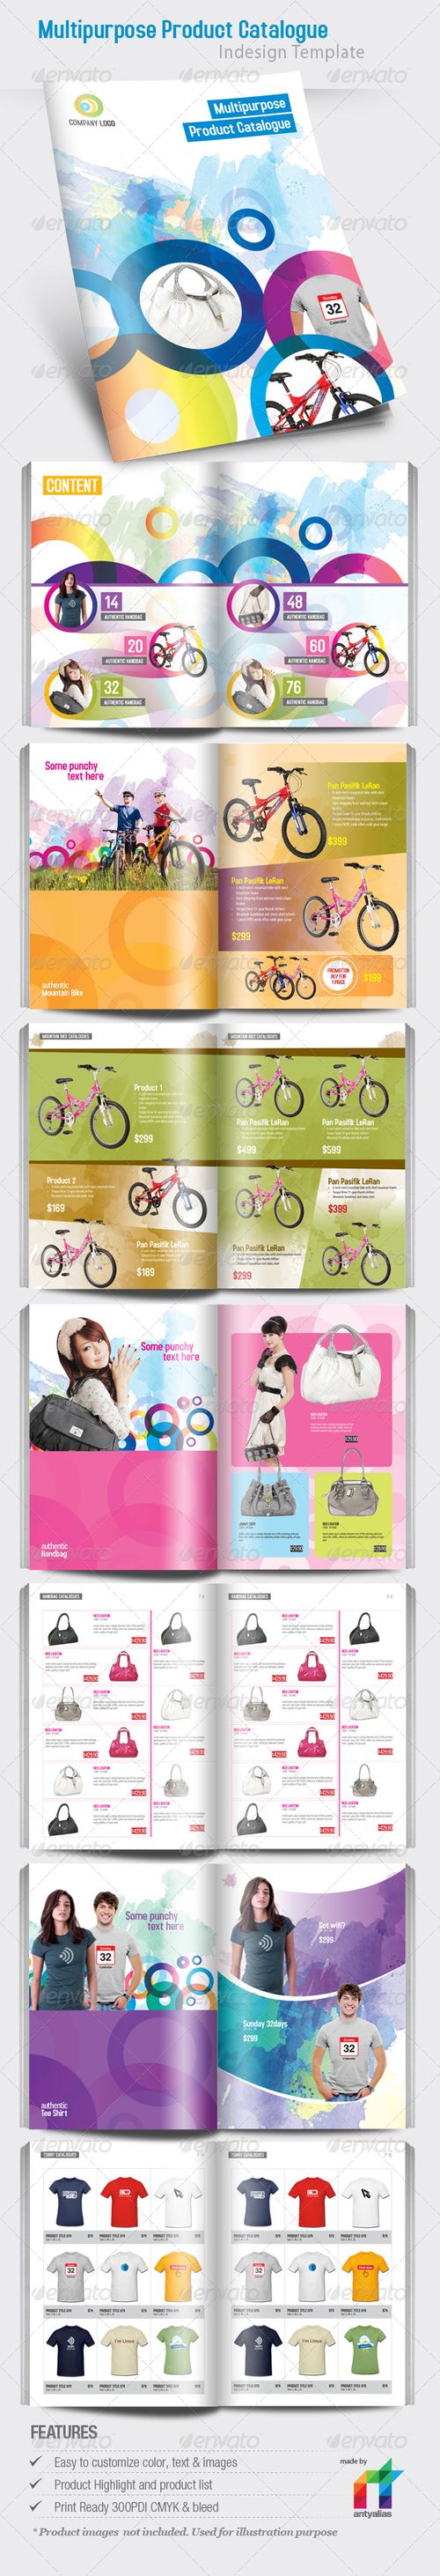 PSD - Multipurpose Product Catalogue Indesign Template